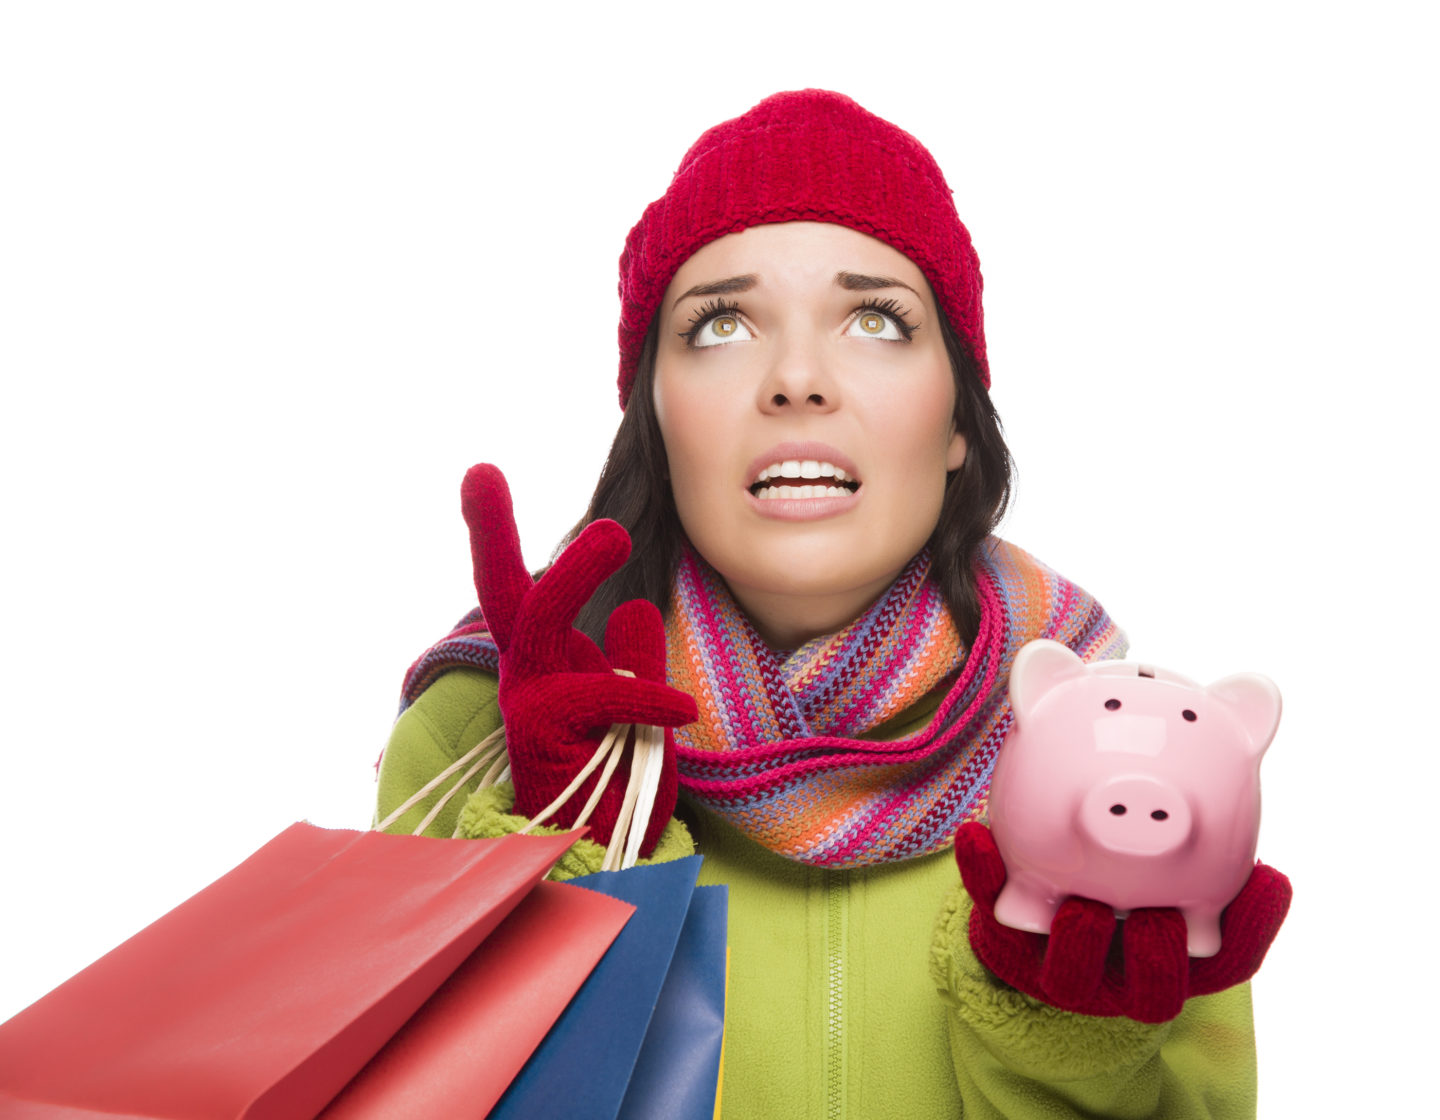 Stressed Mixed Race Woman Wearing Winter Clothing Looking Up Holding Shopping Bags and Piggy Bank Isolated on White Background.